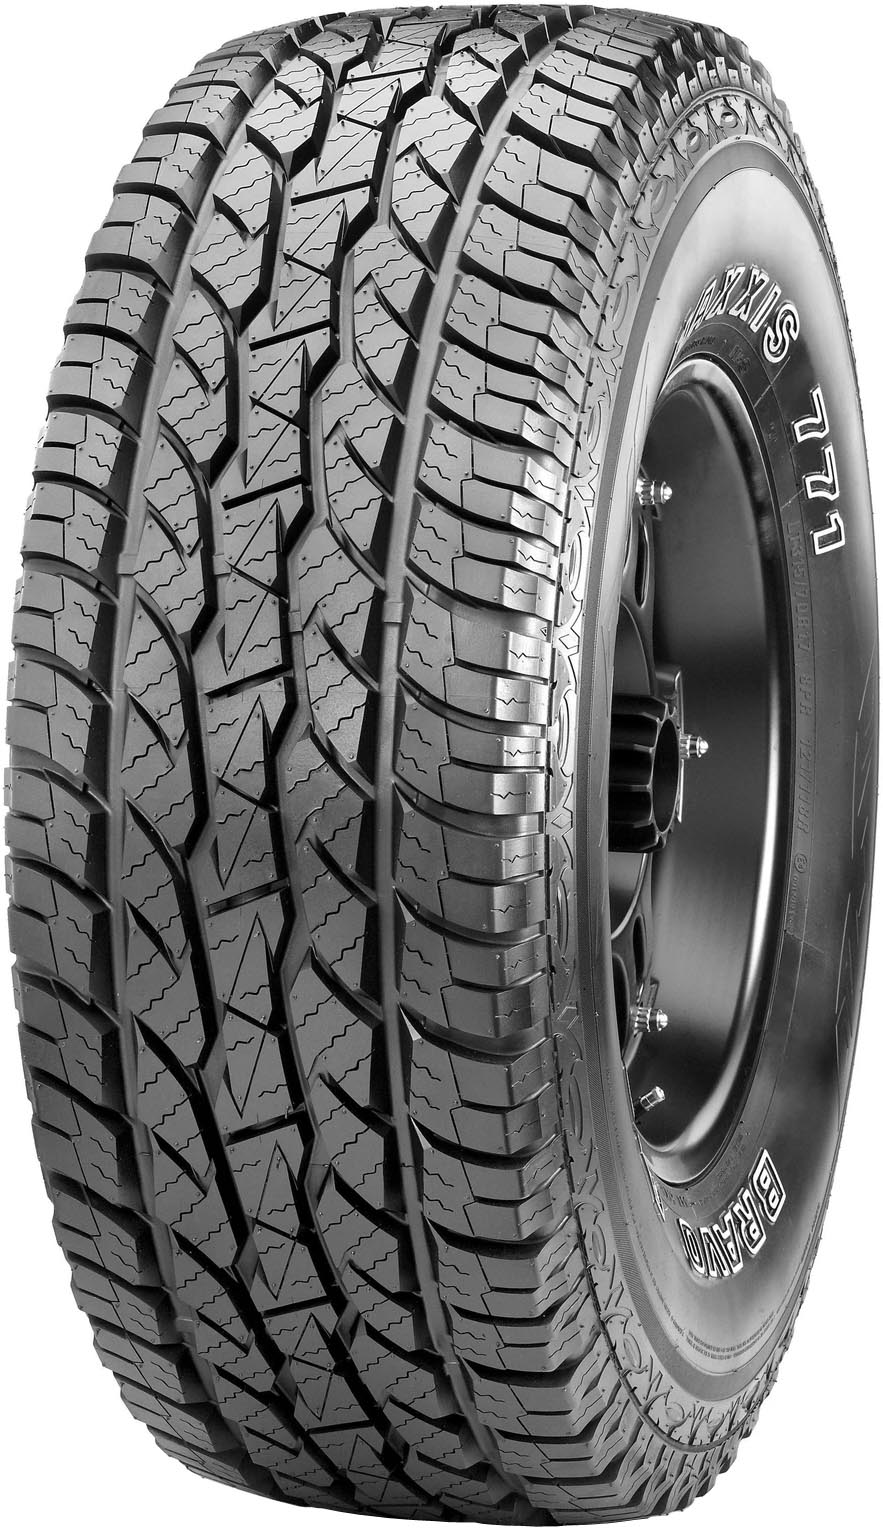 Anvelope jeep MAXXIS AT 771 215/65 R16 98T